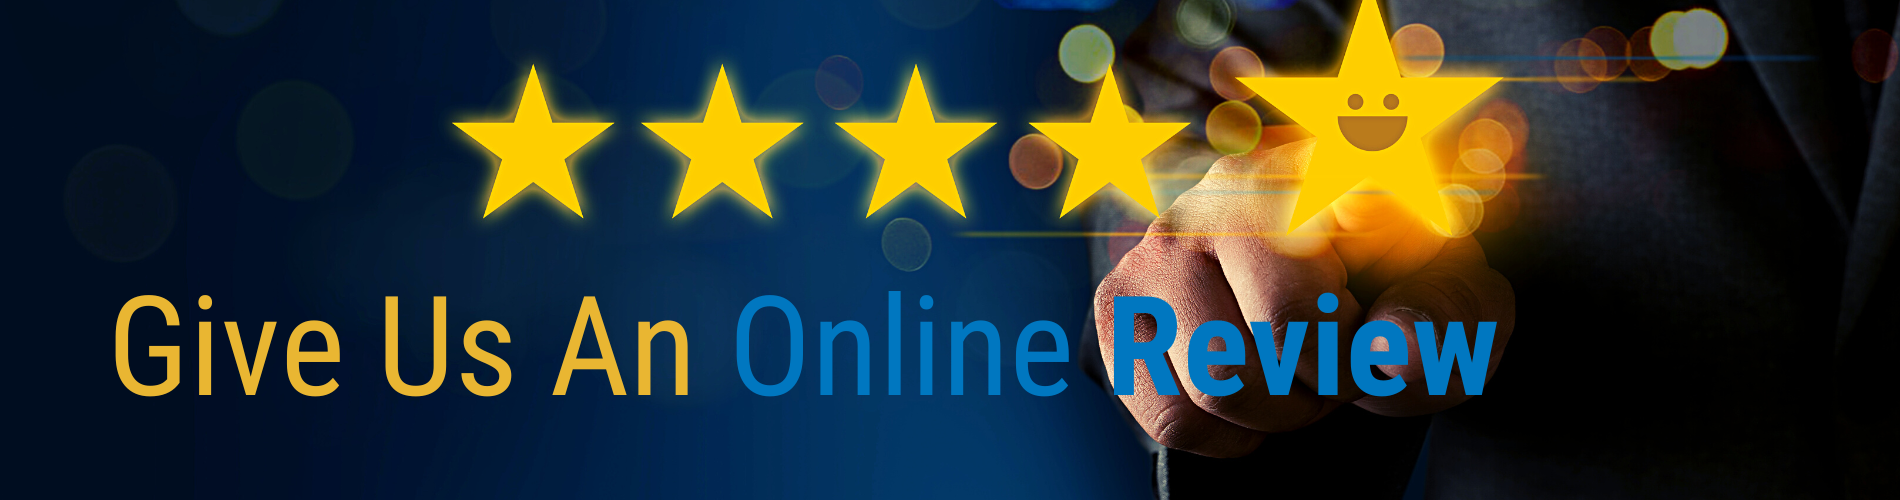 Give Us An Online Review Banner 1